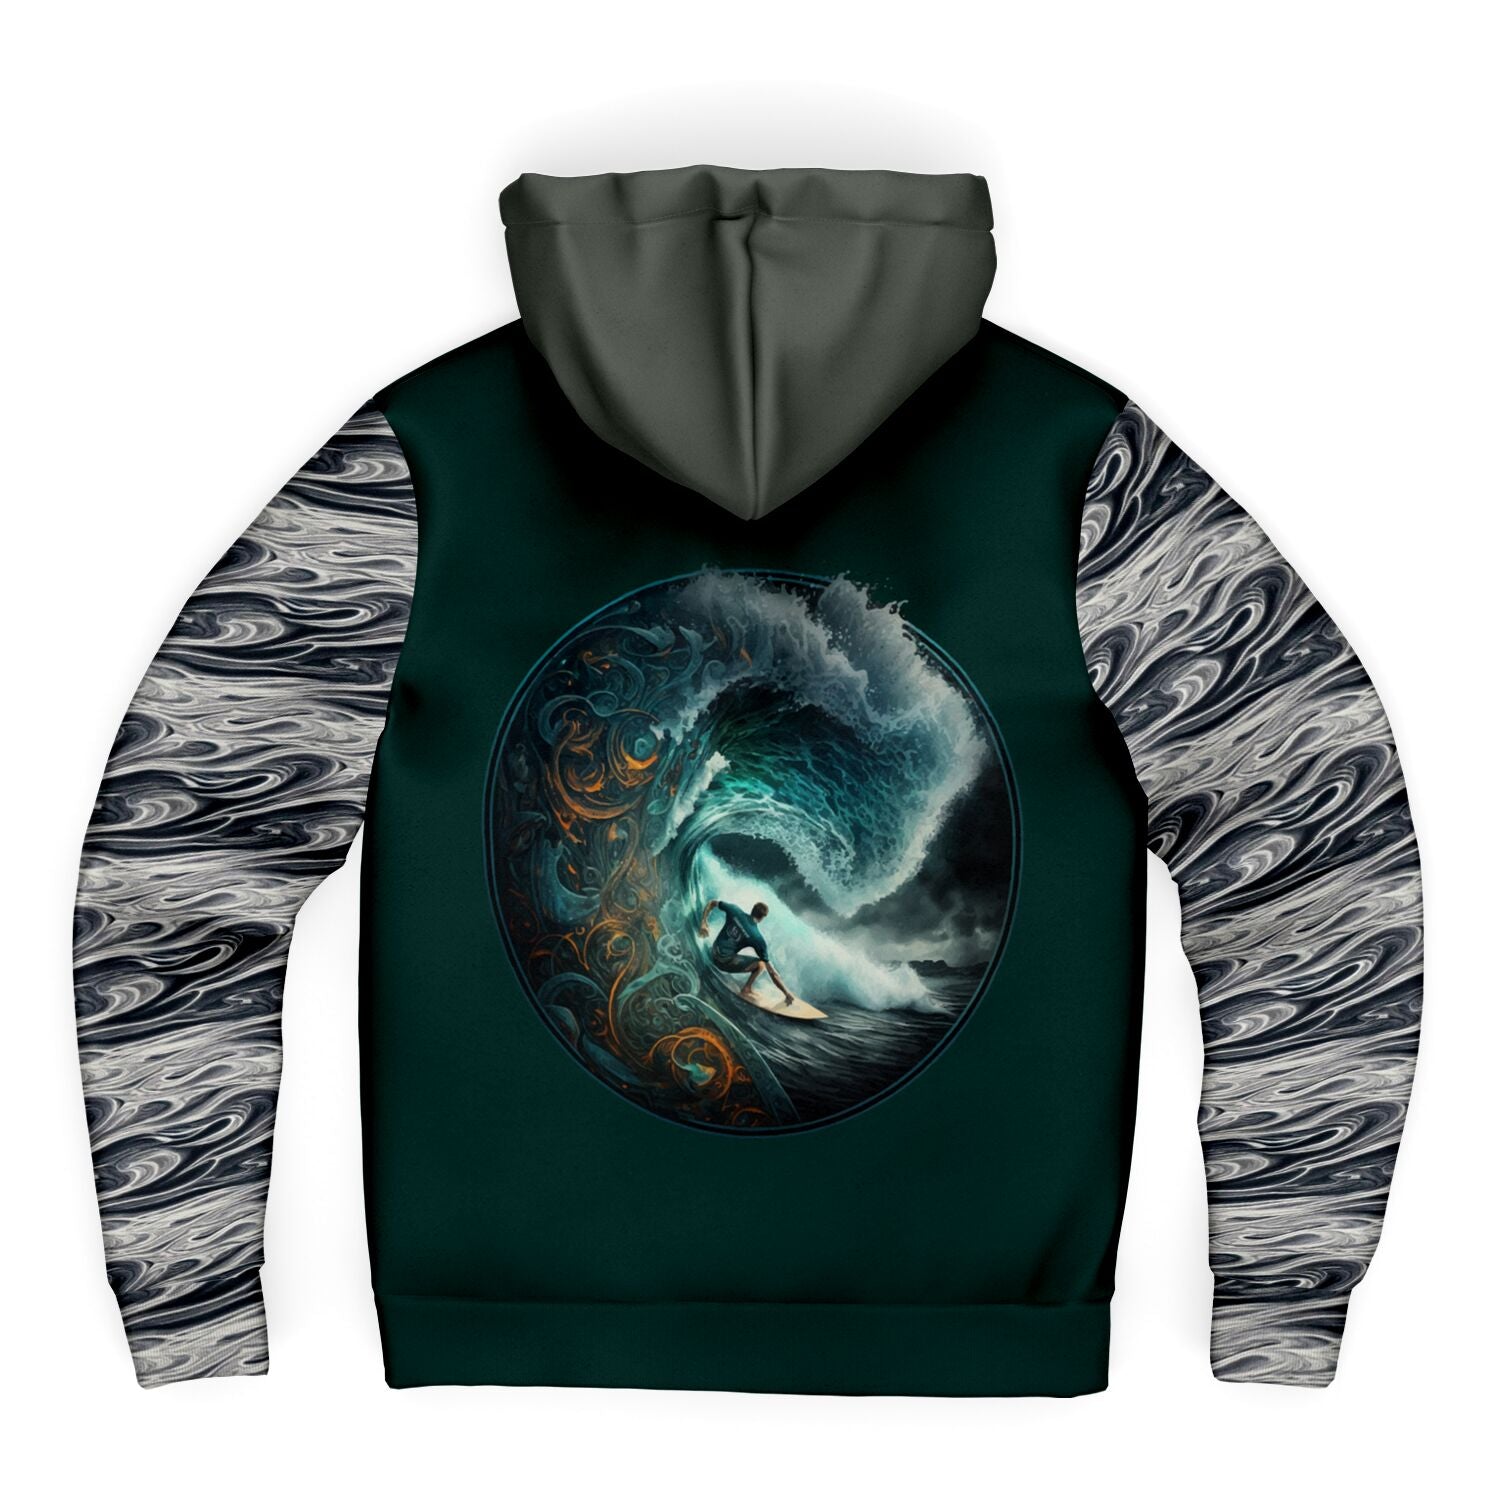 Surfer in a Barrel Microfiber Hoodie: Soft and Durable Fabric with Flawless Graphic